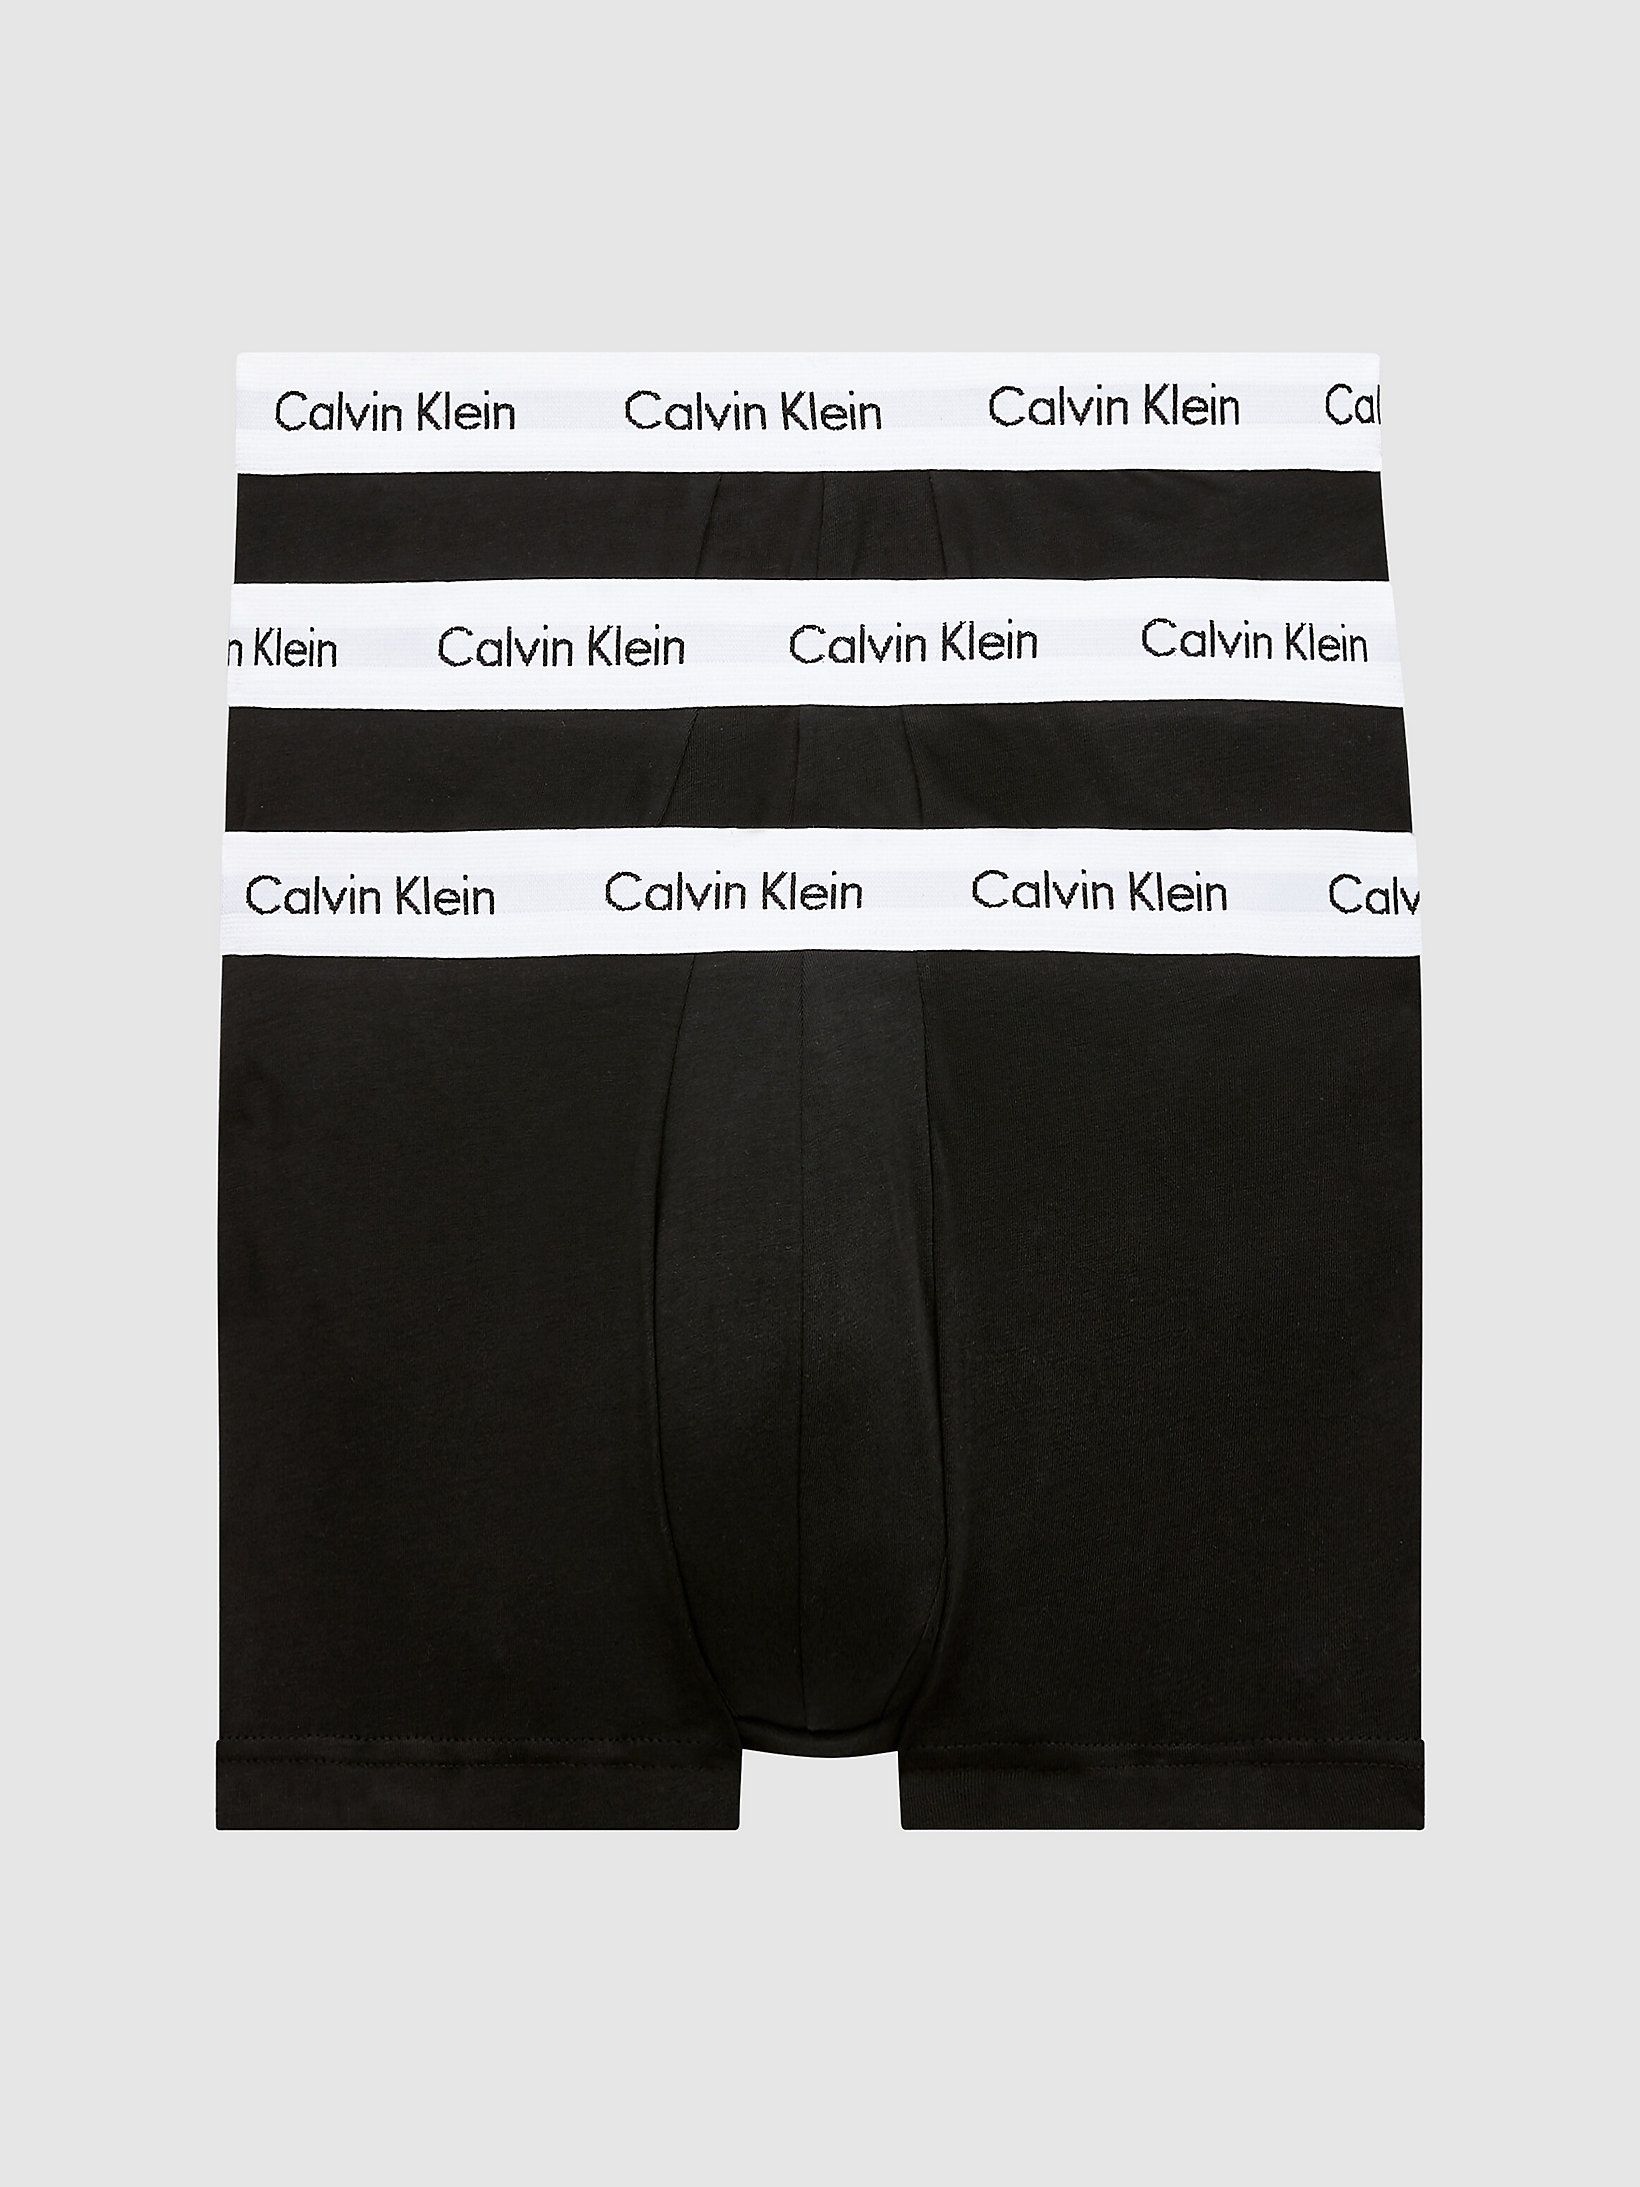 DETAILS COTTON STRETCH – classic designs and everyday style cut from soft cotton with enough stretch to ensure a superior fit. • cotton elastane blend • low rise waist • Calvin Klein signature elastic waistband Our model is 1.90m (6ft 3in) and is wearing a size M. 95% cotton 5% elastane machine wash tumble dry low fits true to size Boxers, trunks and briefs can only be returned if unopened in original packaging, unworn and in the same condition as delivered, with all tags attached. Style #: 0000U2664G